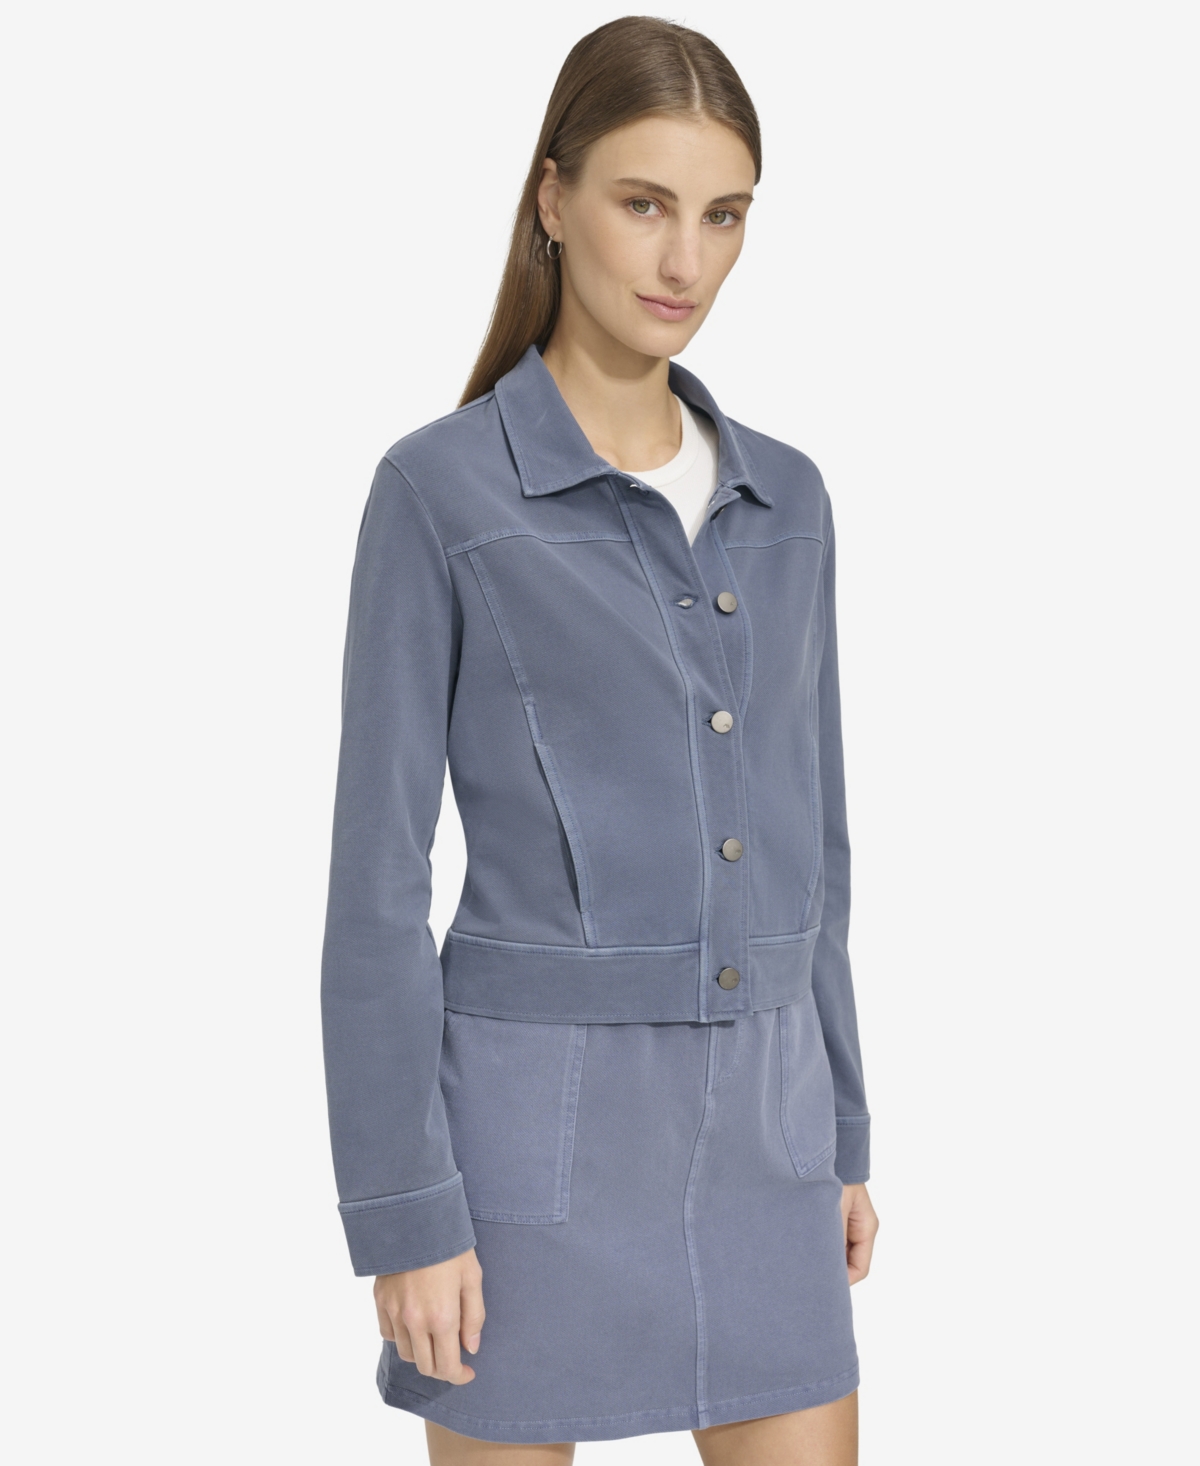 Women's Soft Stretch Twill Button Front Jacket - Ink